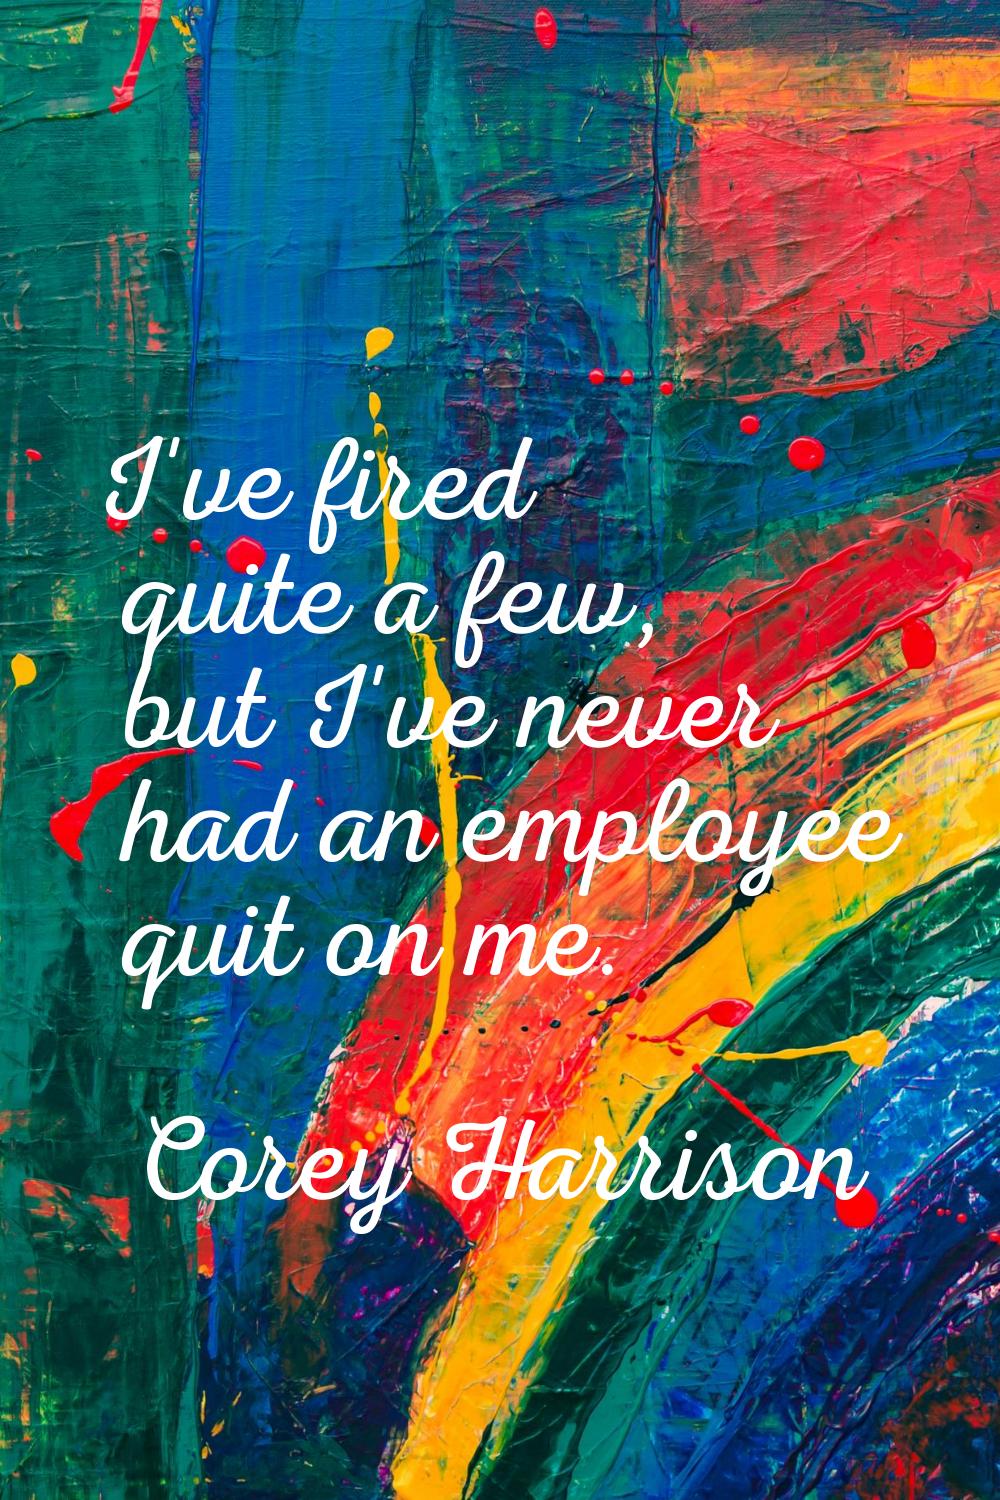 I've fired quite a few, but I've never had an employee quit on me.